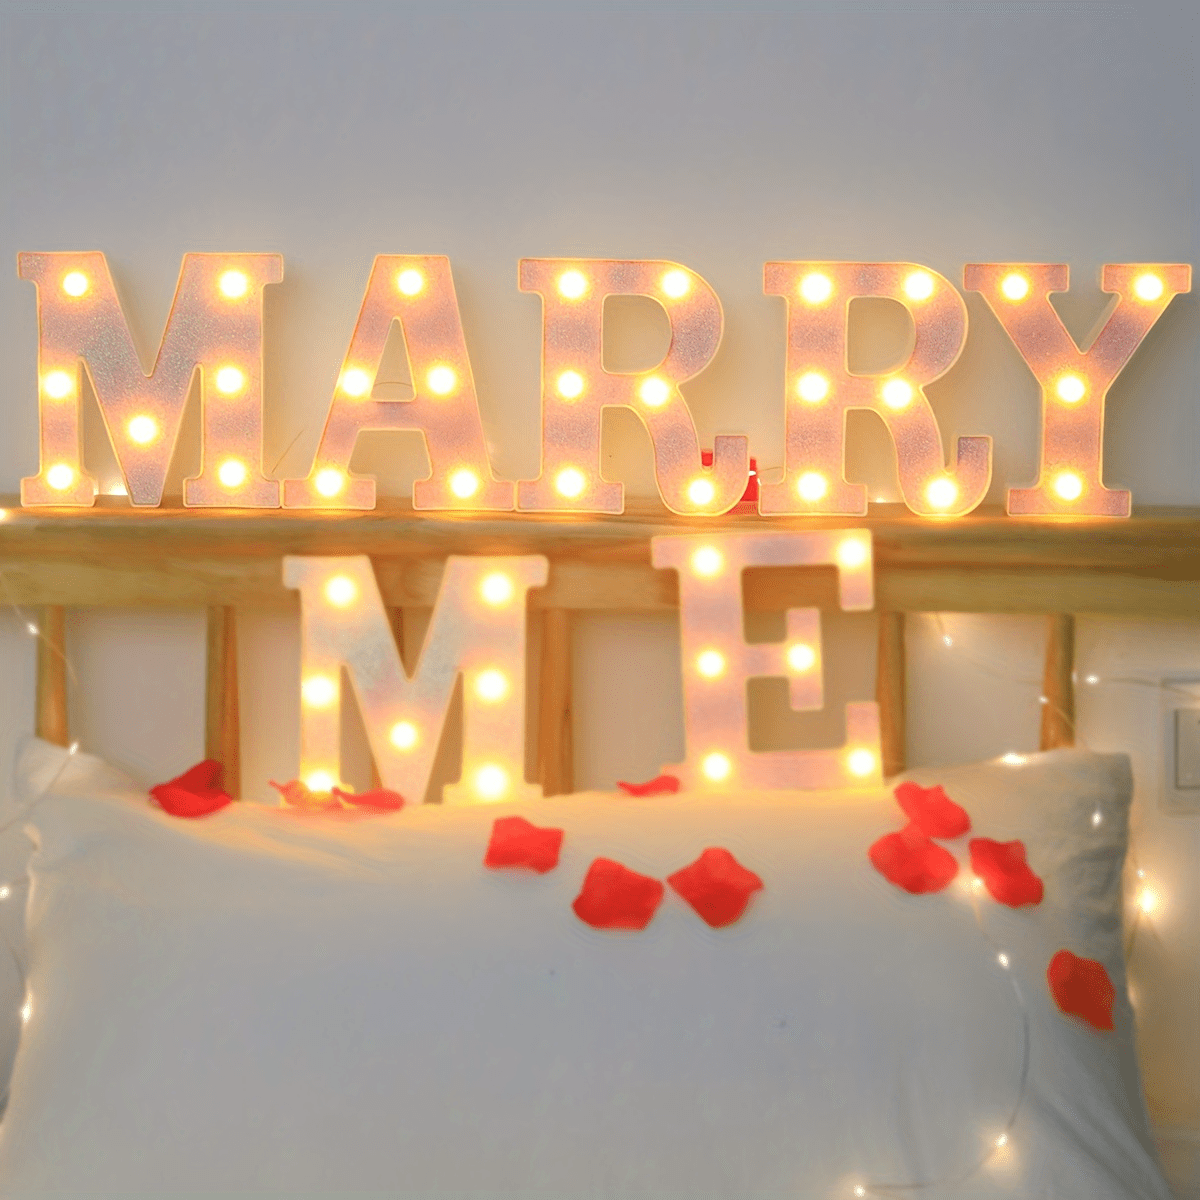 

1pc Lighting Glowing Letters Light, Led Battery Powered Letter Light, For Bedroom Birthday Party Wedding Home Christmas Decoration Eid Al-adha Mubarak